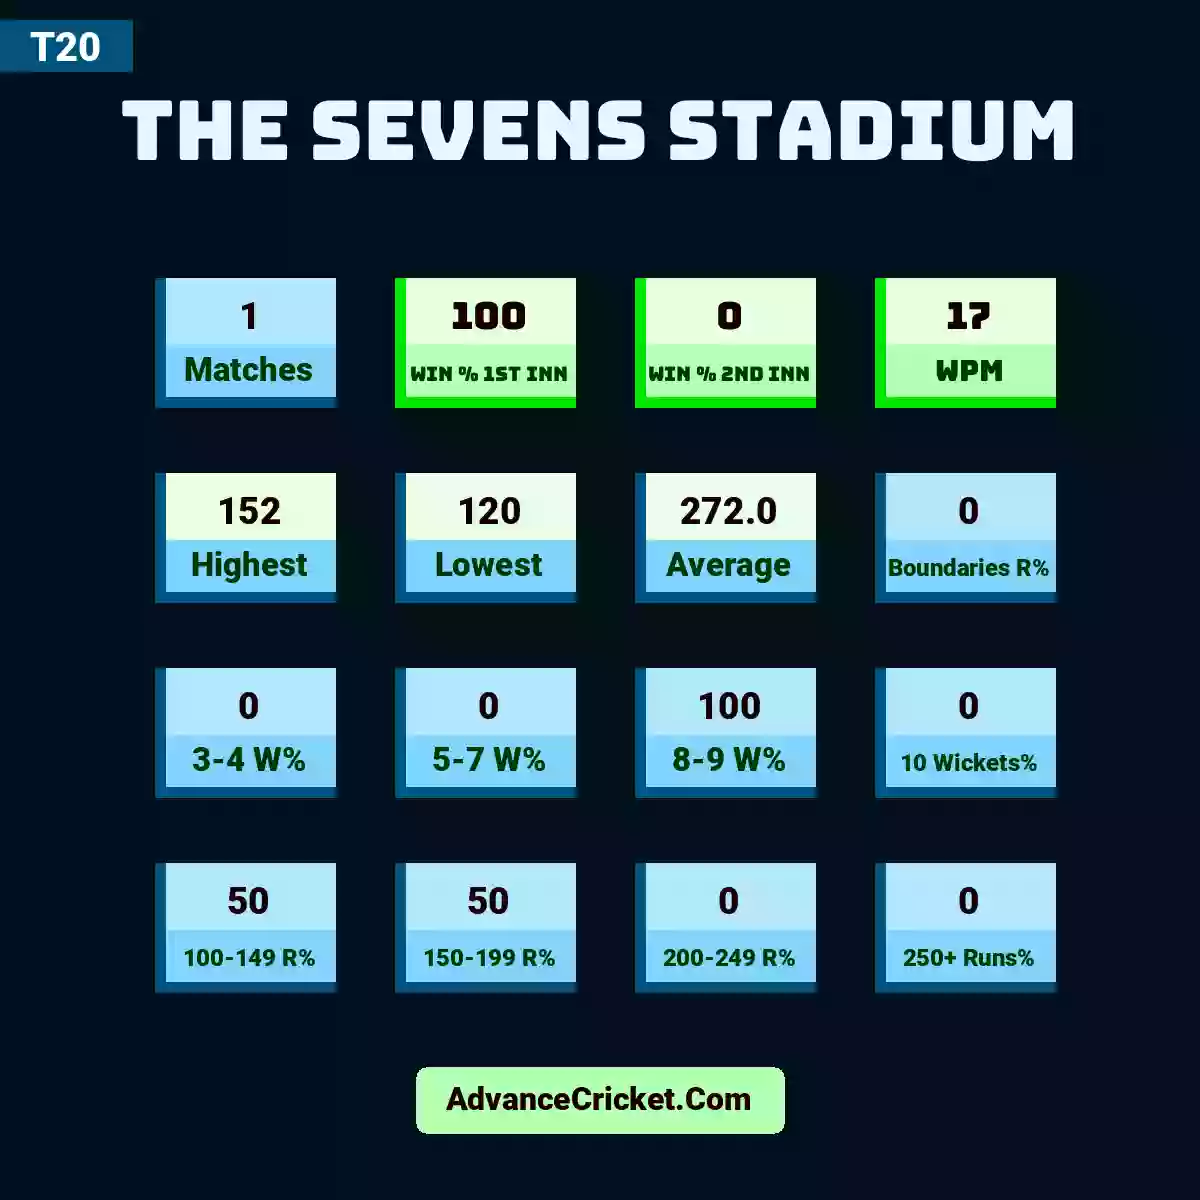 Image showing The Sevens Stadium with Matches: 1, Win % 1st Inn: 100, Win % 2nd Inn: 0, WPM: 17, Highest: 152, Lowest: 120, Average: 272.0, Boundaries R%: 0, 3-4 W%: 0, 5-7 W%: 0, 8-9 W%: 100, 10 Wickets%: 0, 100-149 R%: 50, 150-199 R%: 50, 200-249 R%: 0, 250+ Runs%: 0.